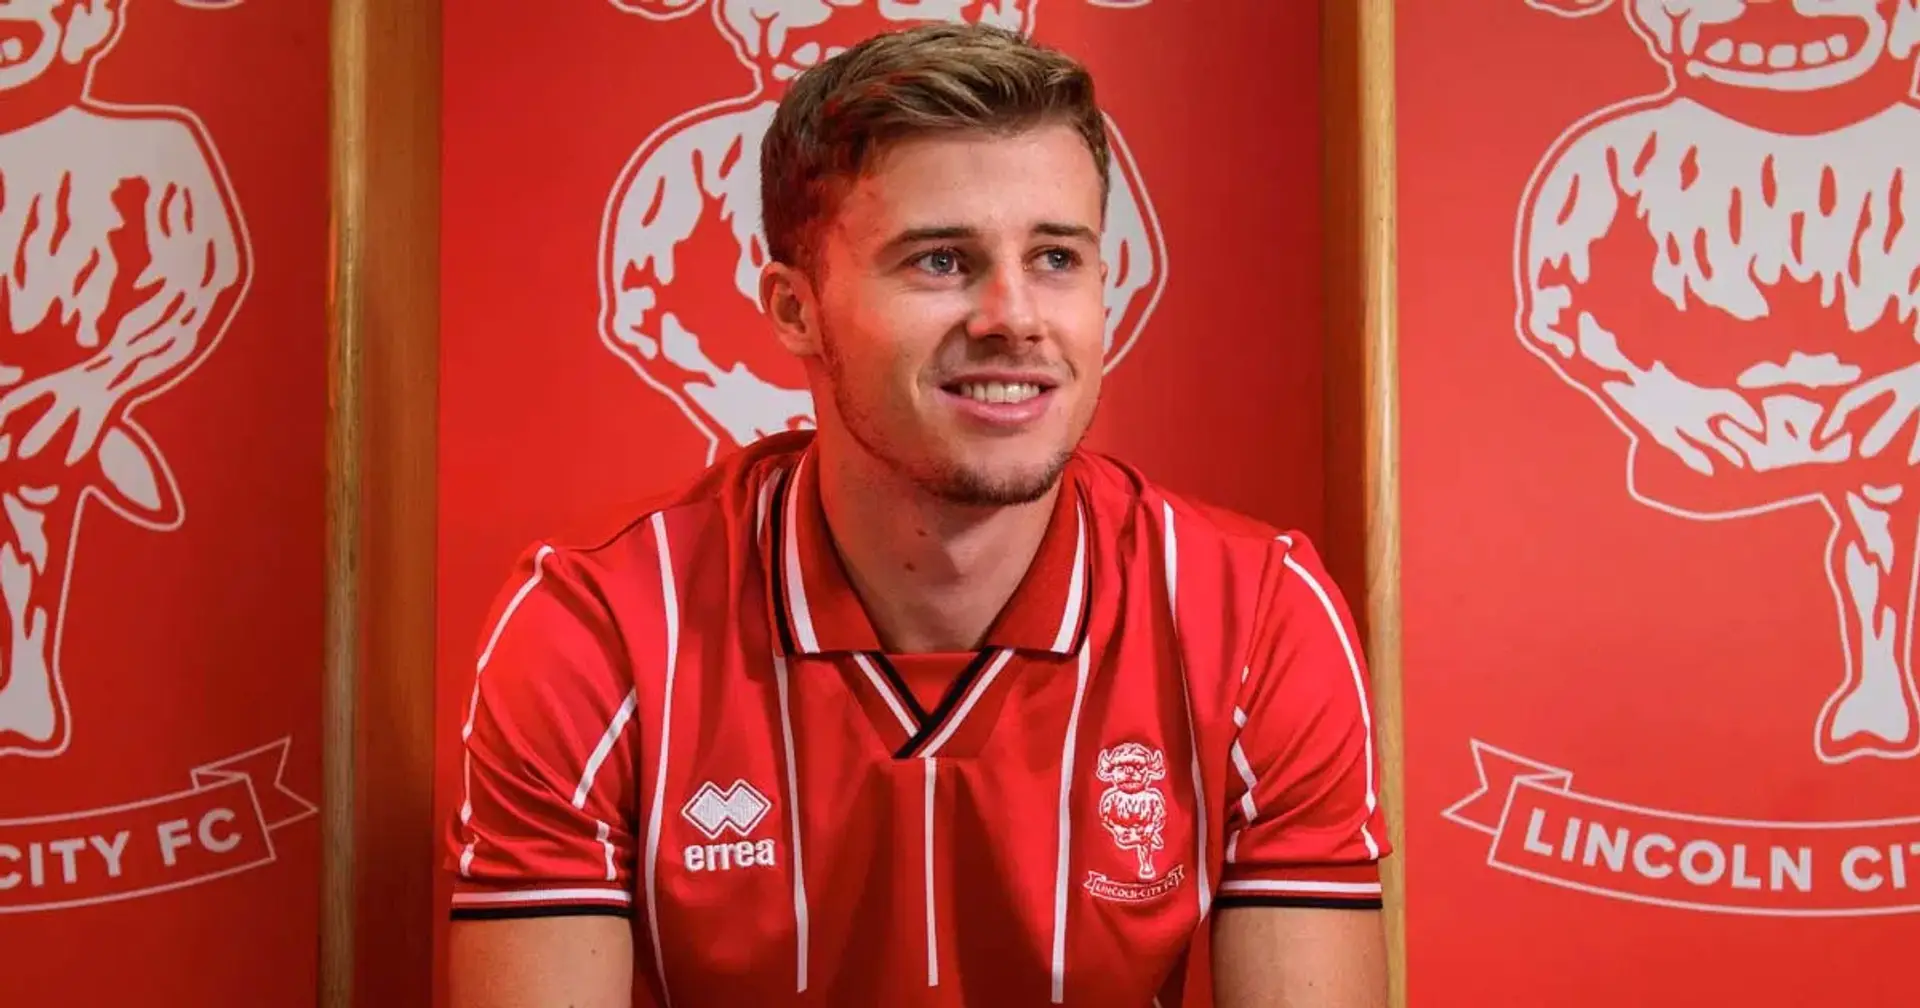 'They are the best in the country but it’s the cup, so who knows what can happen?': Lincoln midfielder previews Liverpool tie